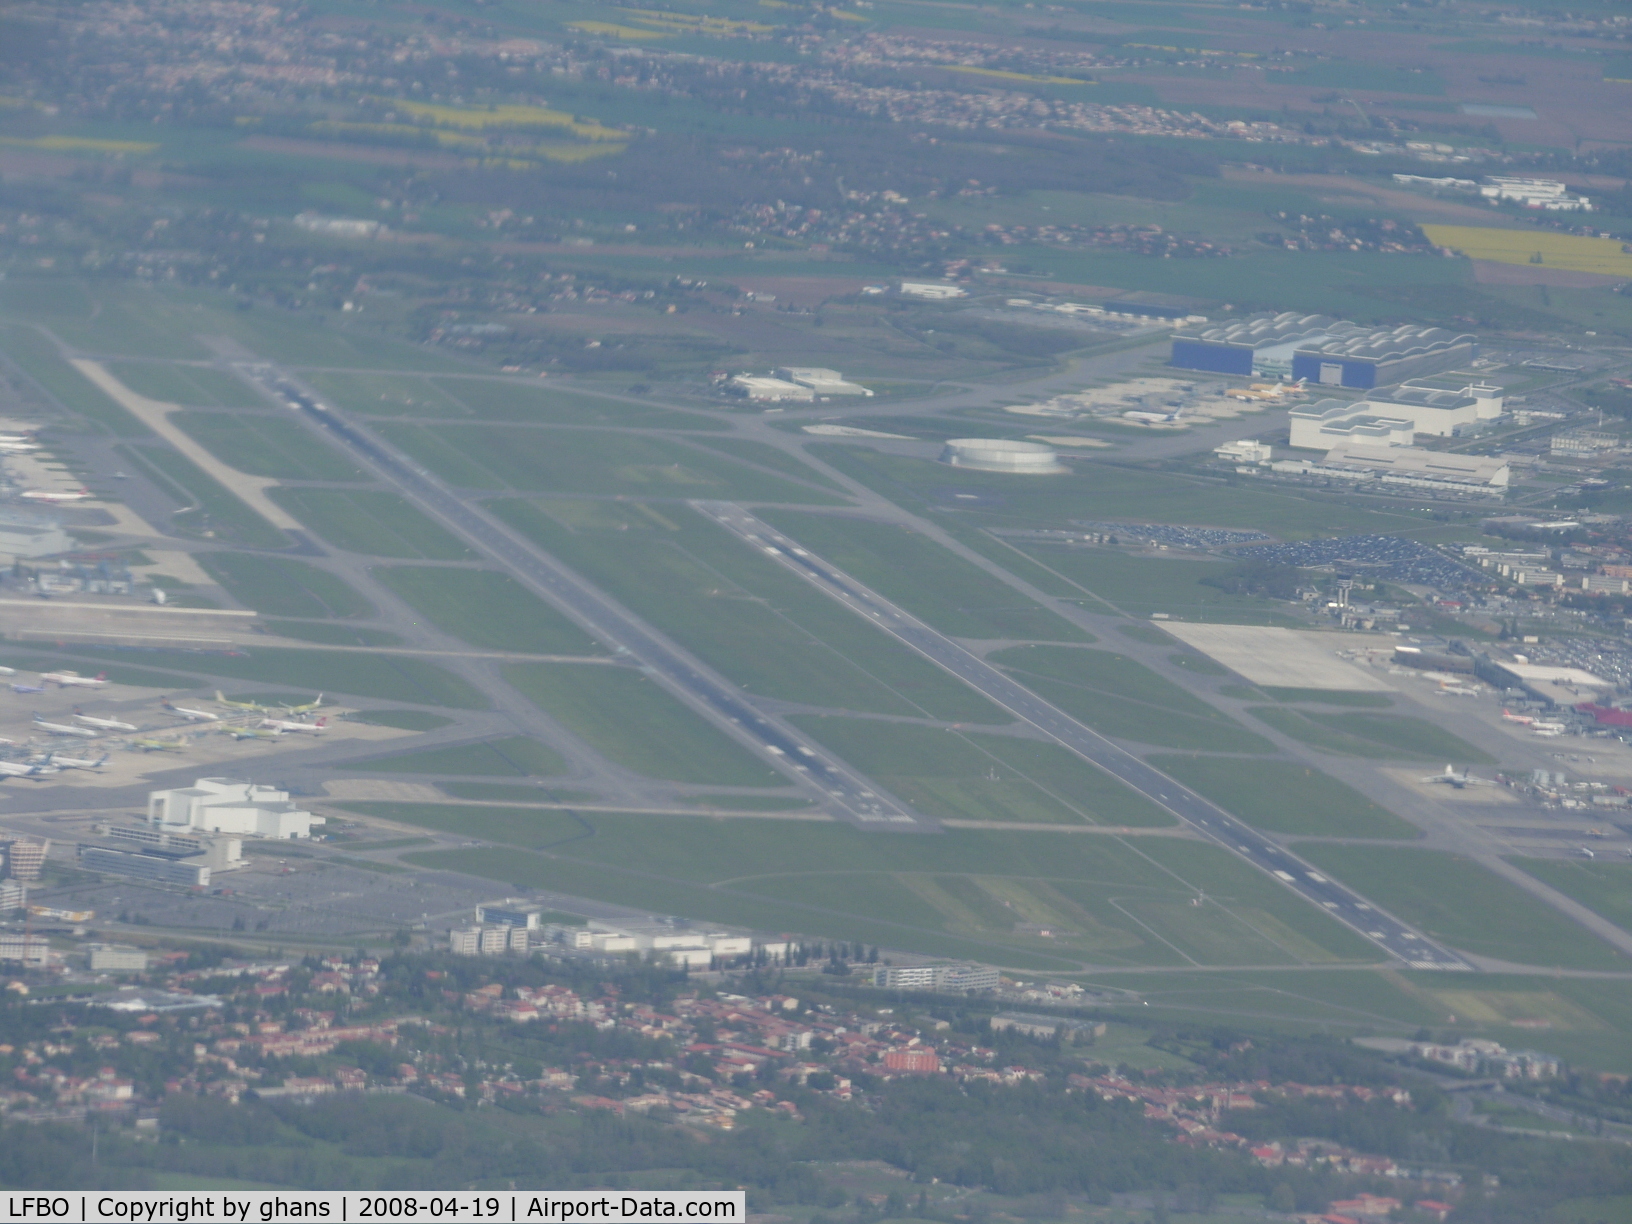 Toulouse Airport, Blagnac Airport France (LFBO) - on our way back home